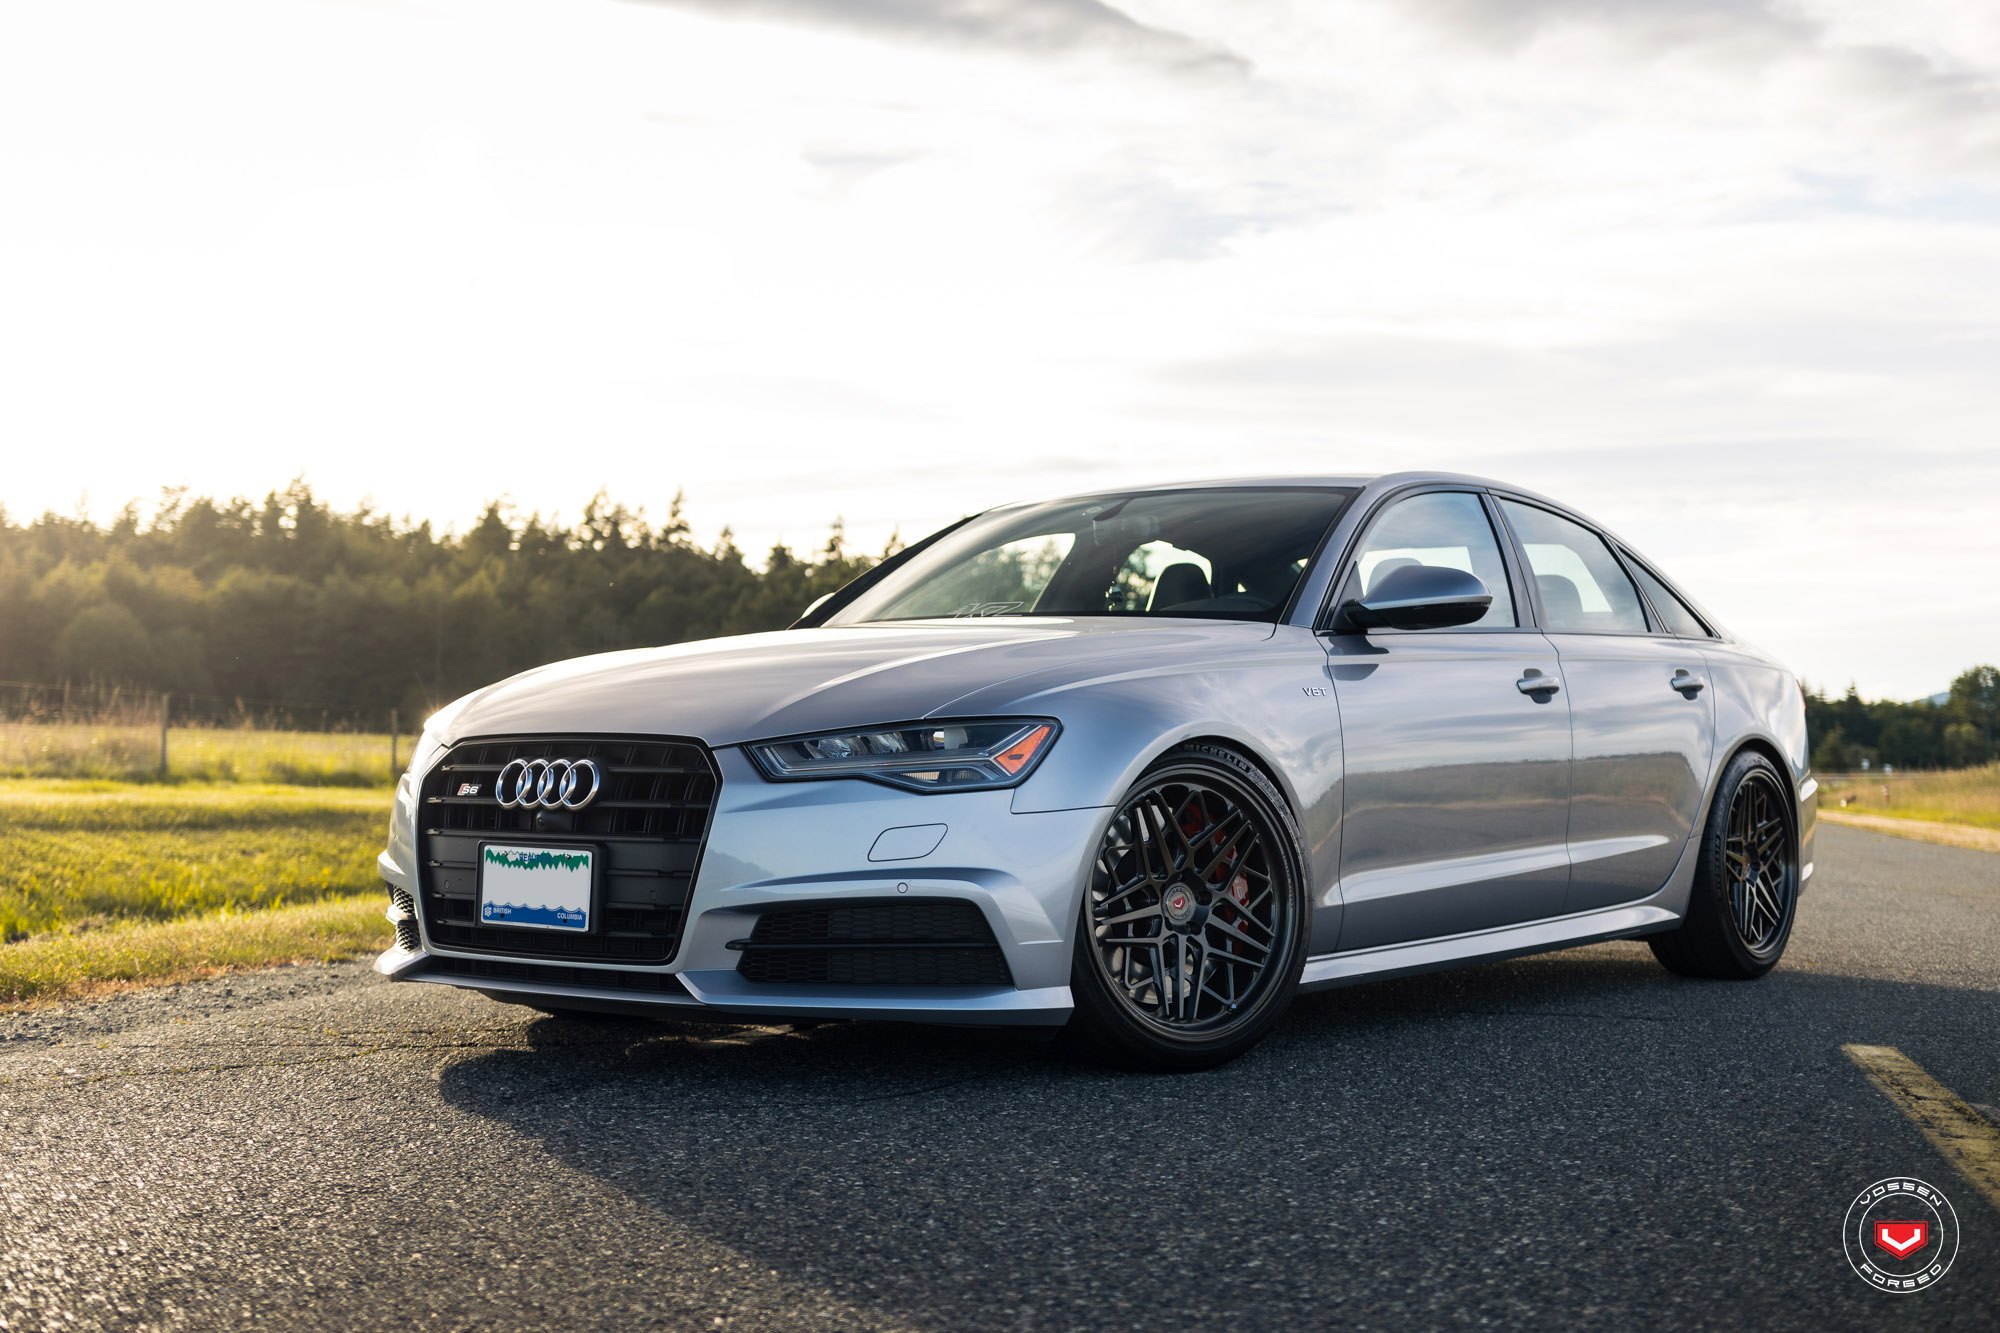 Silver Audi S6 with Aftermarket Projector Headlights - Photo by Vossen